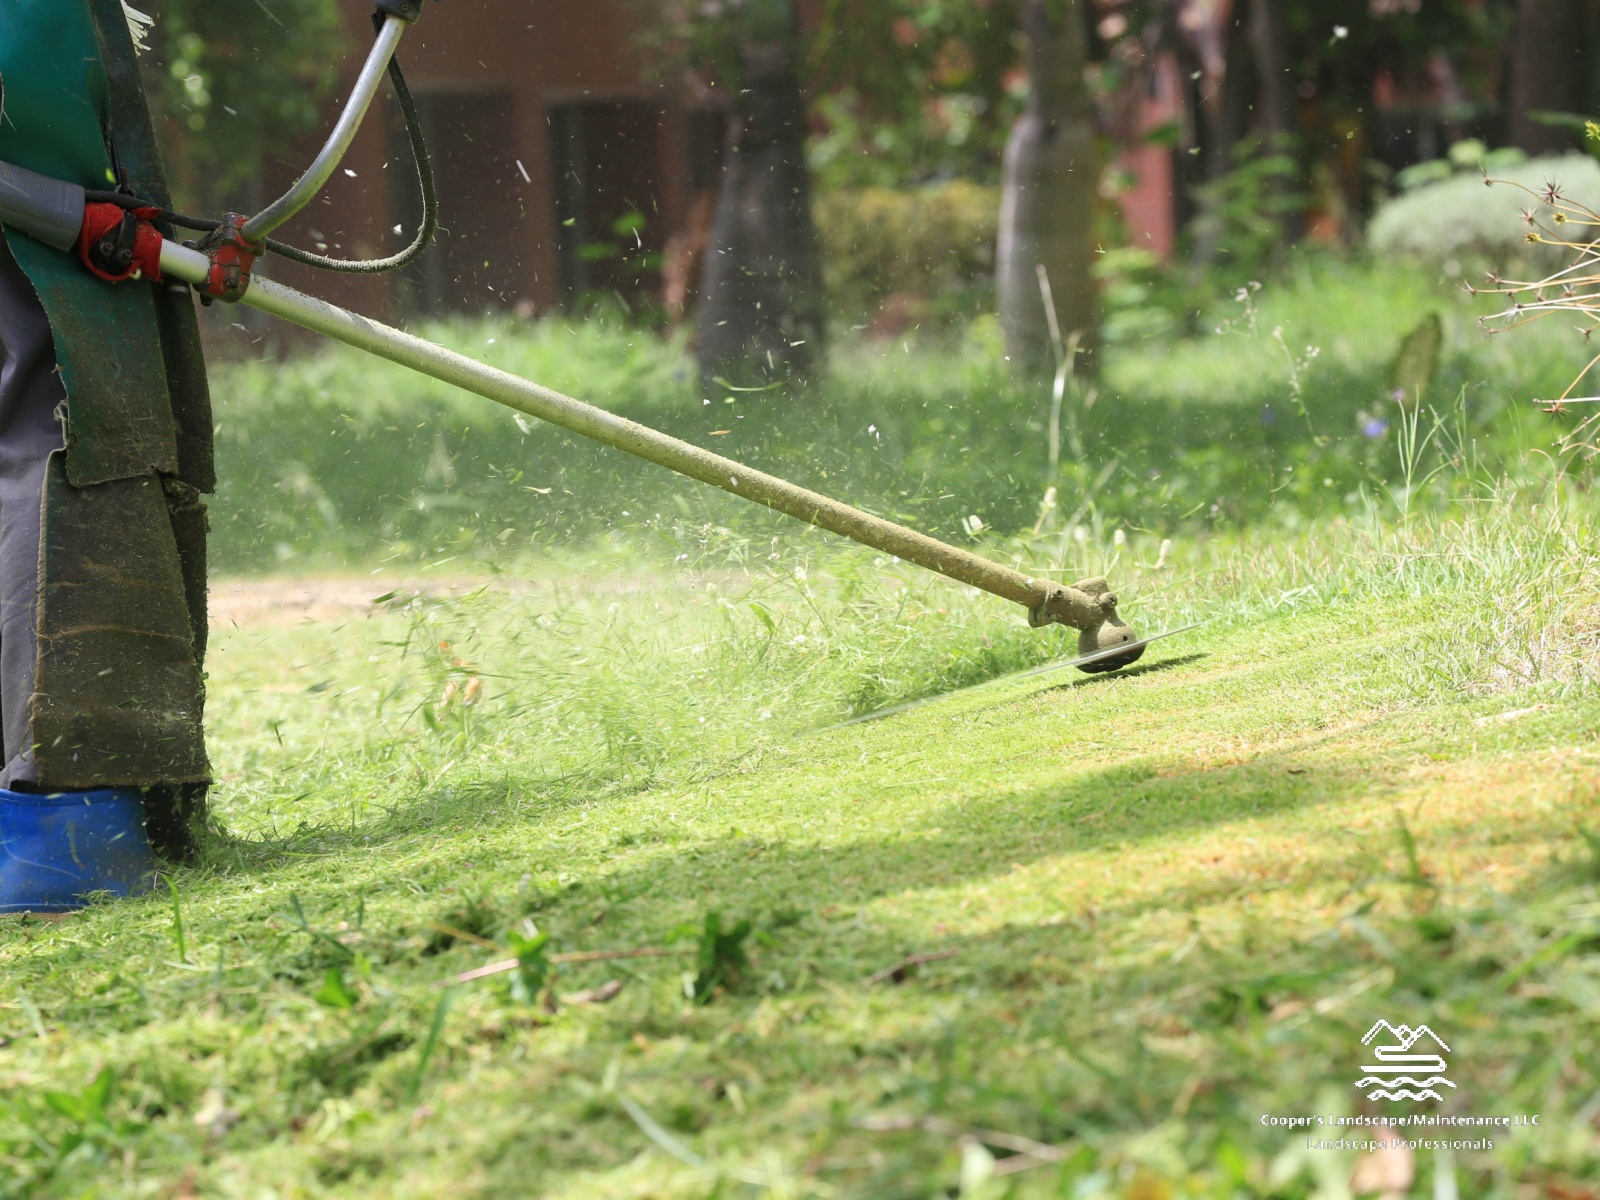 Start Planning Your Lawn Care and Maintenance for Spring